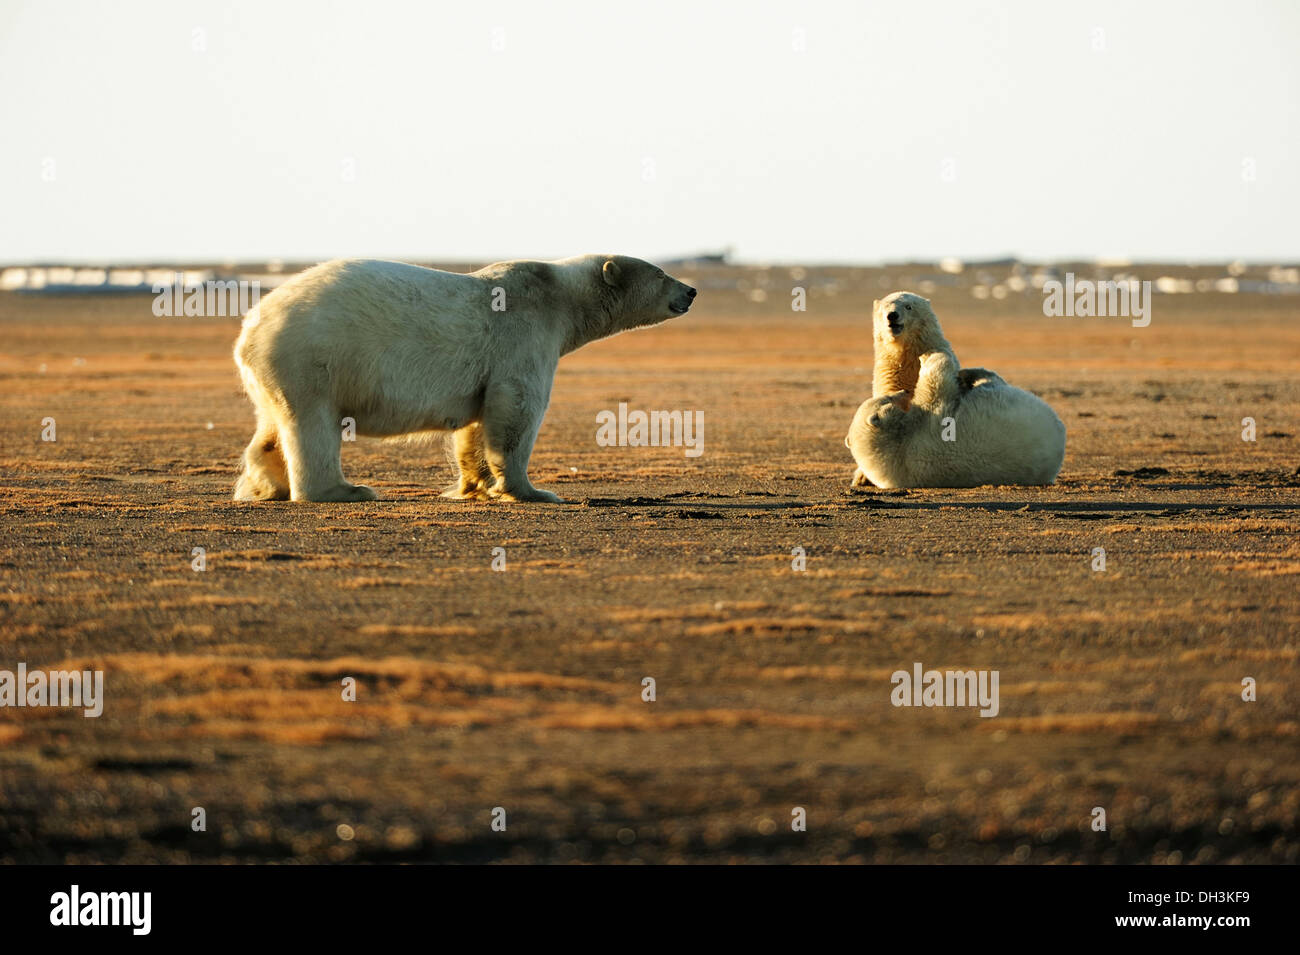 Two young polar bears (Ursus maritimus) play fighting with each other with their mother watching, Kaktovik, North Slope region Stock Photo